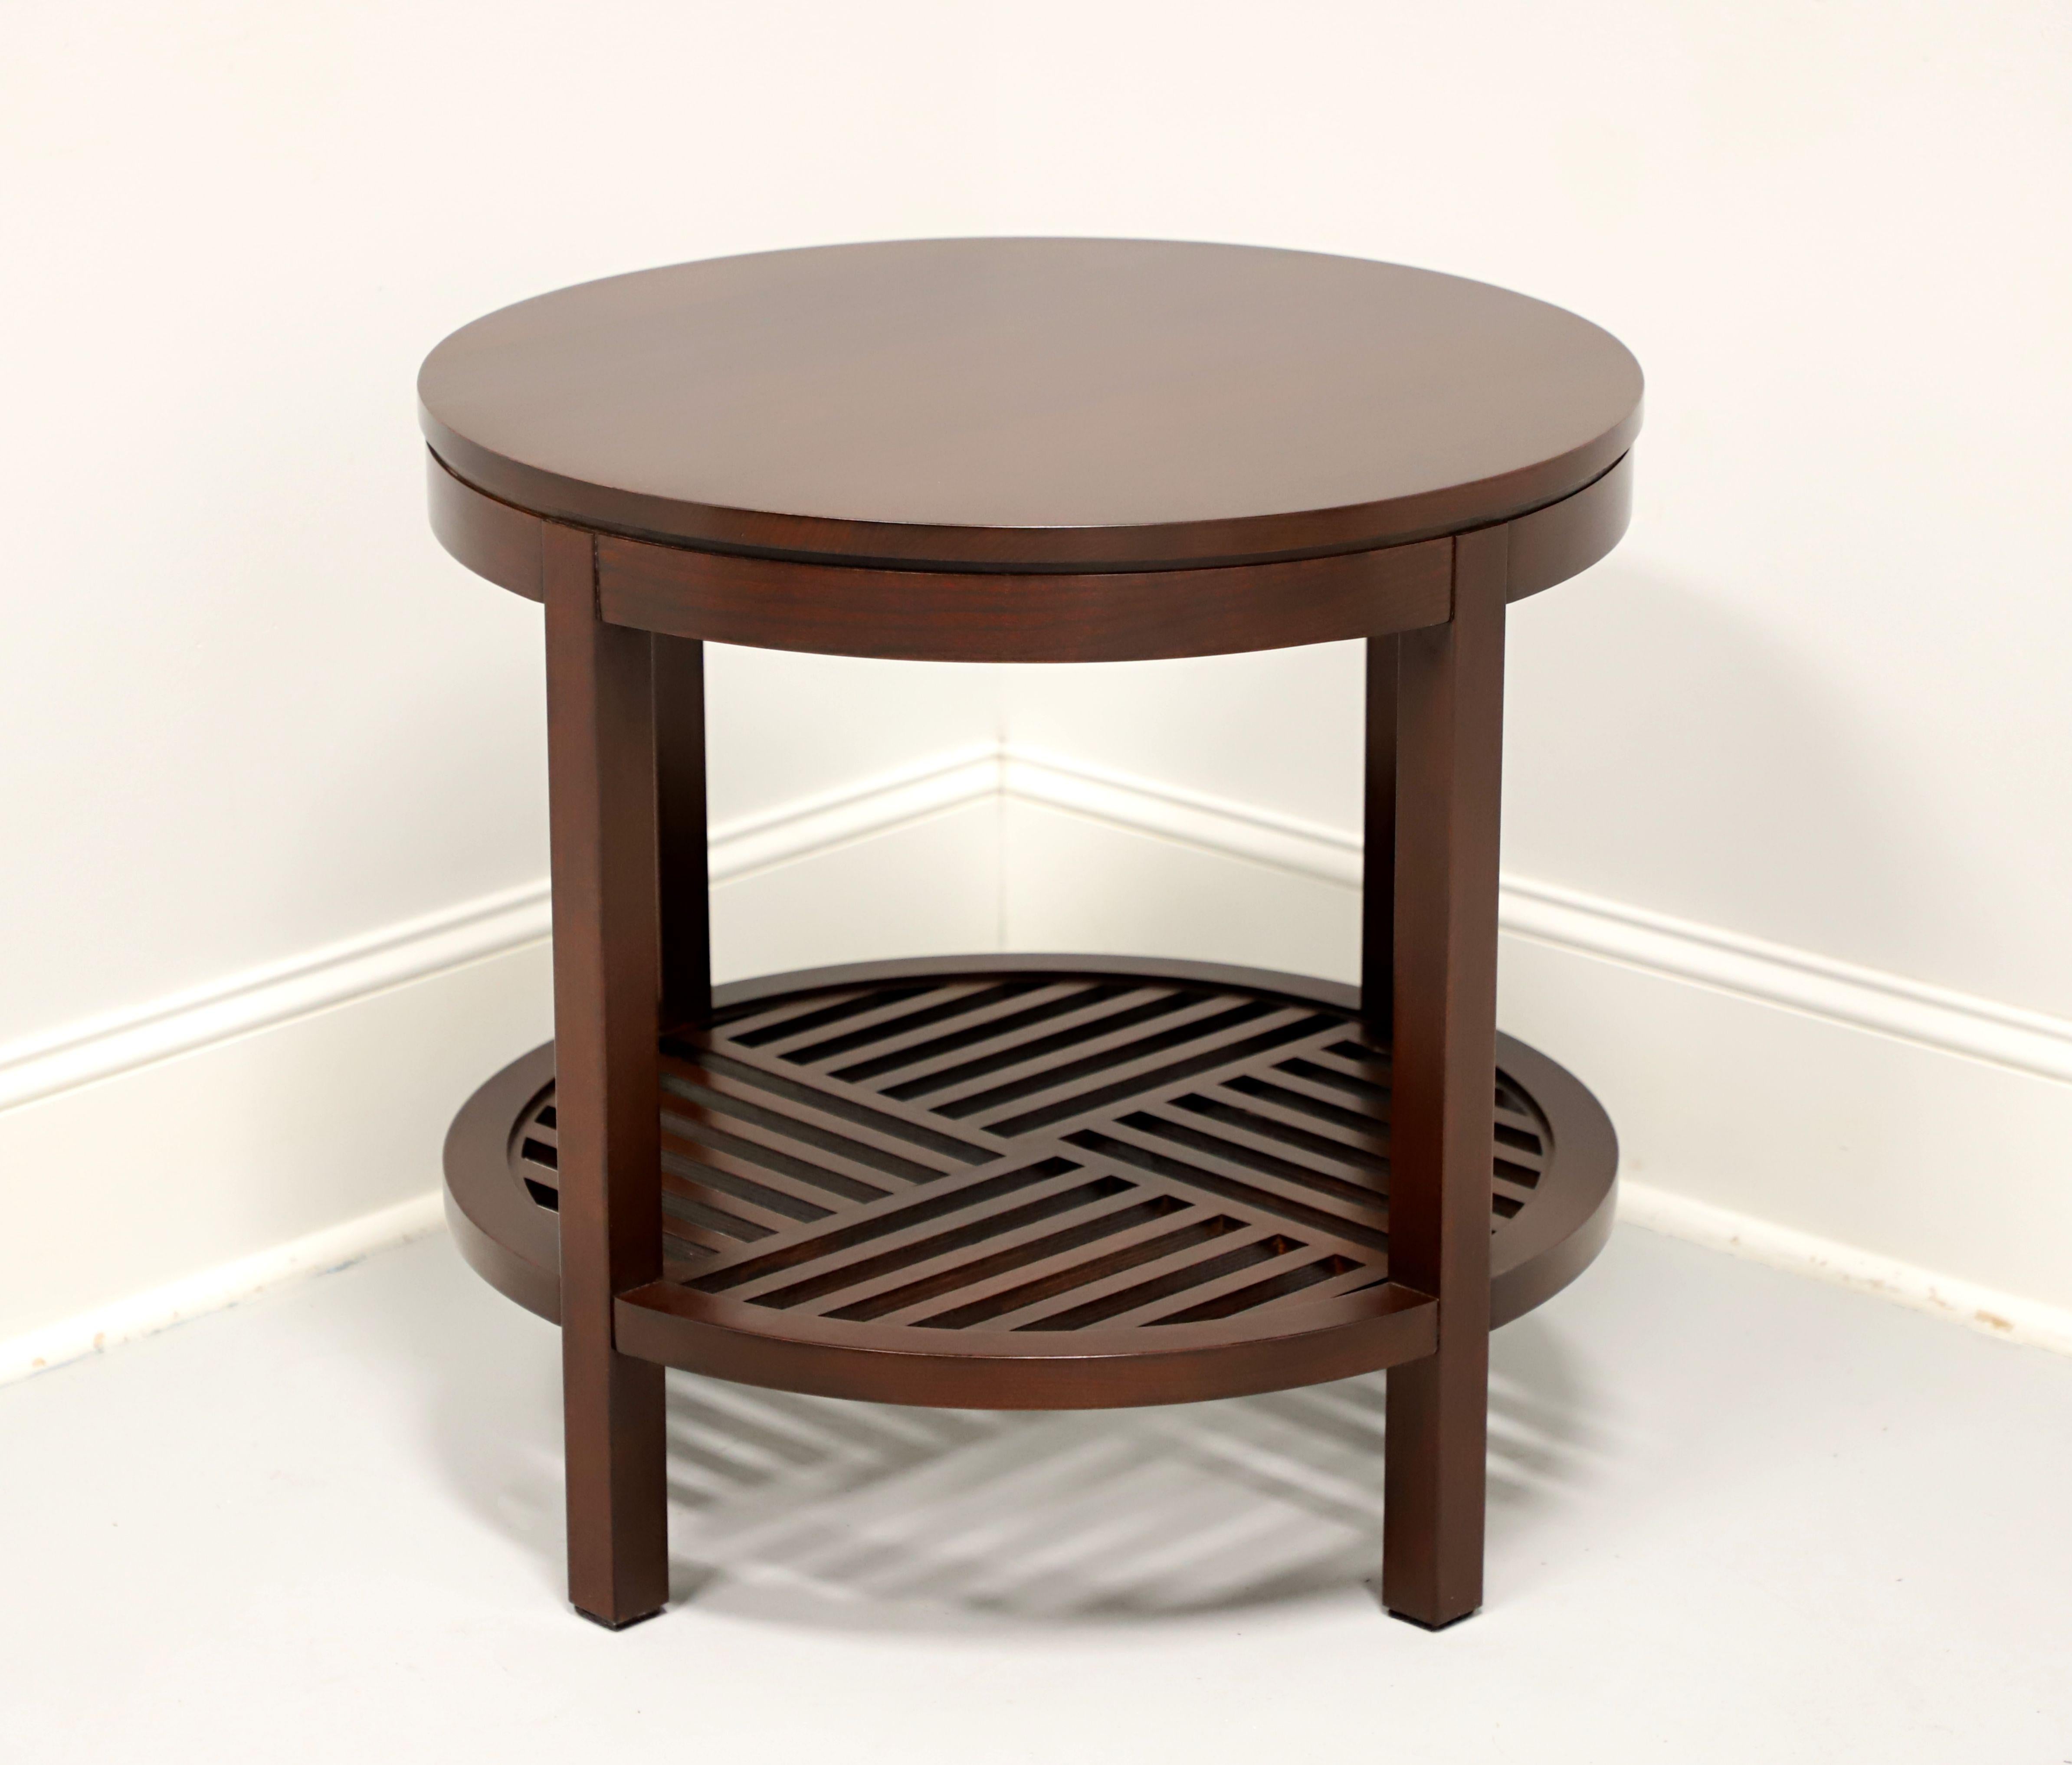 A Modern Contemporary style round lamp table by Stickley Furniture, from their Metropolitan Collection. Cherry wood with their Saratoga finish, smooth edge to top & apron, open slat undertier shelf in a geometric design, and square straight legs.